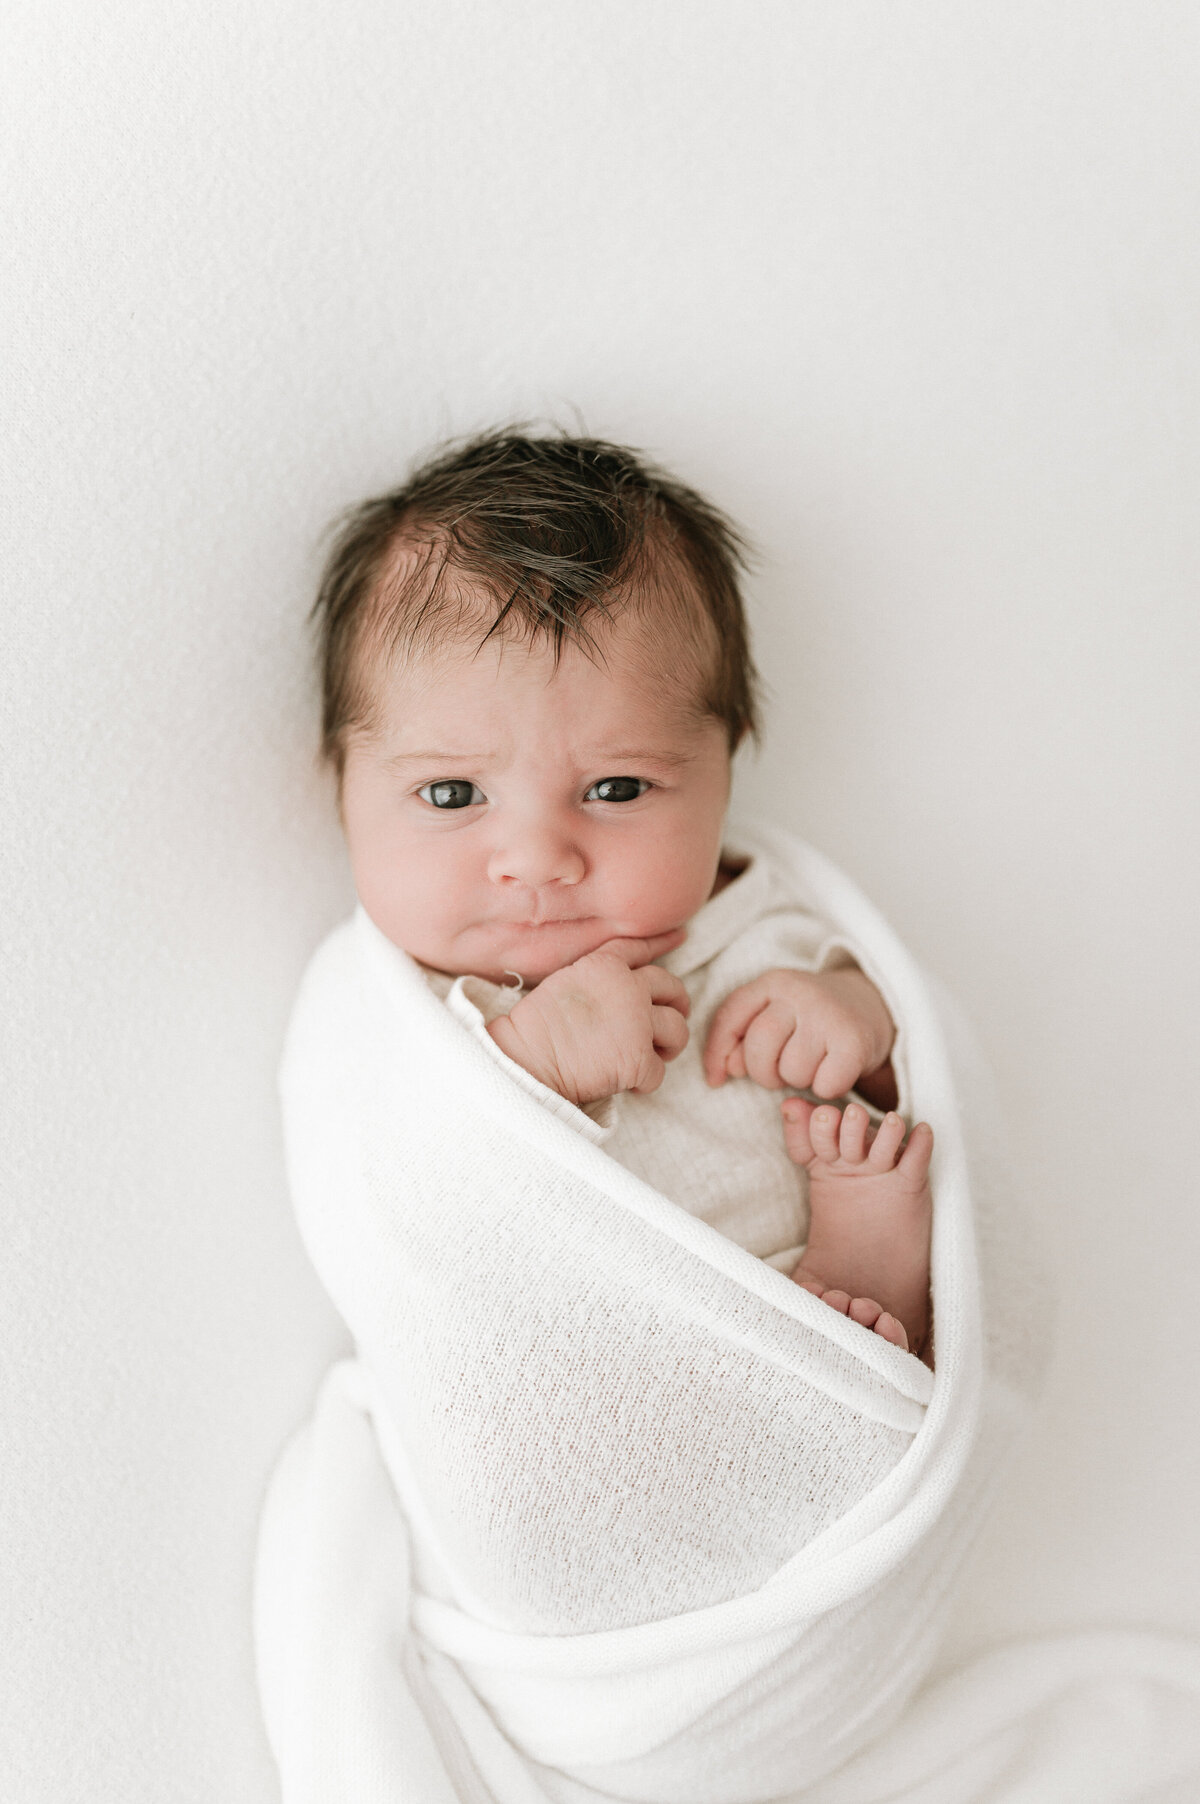 Newborn baby with lots of hair curled up in a blanket during a photoshoot